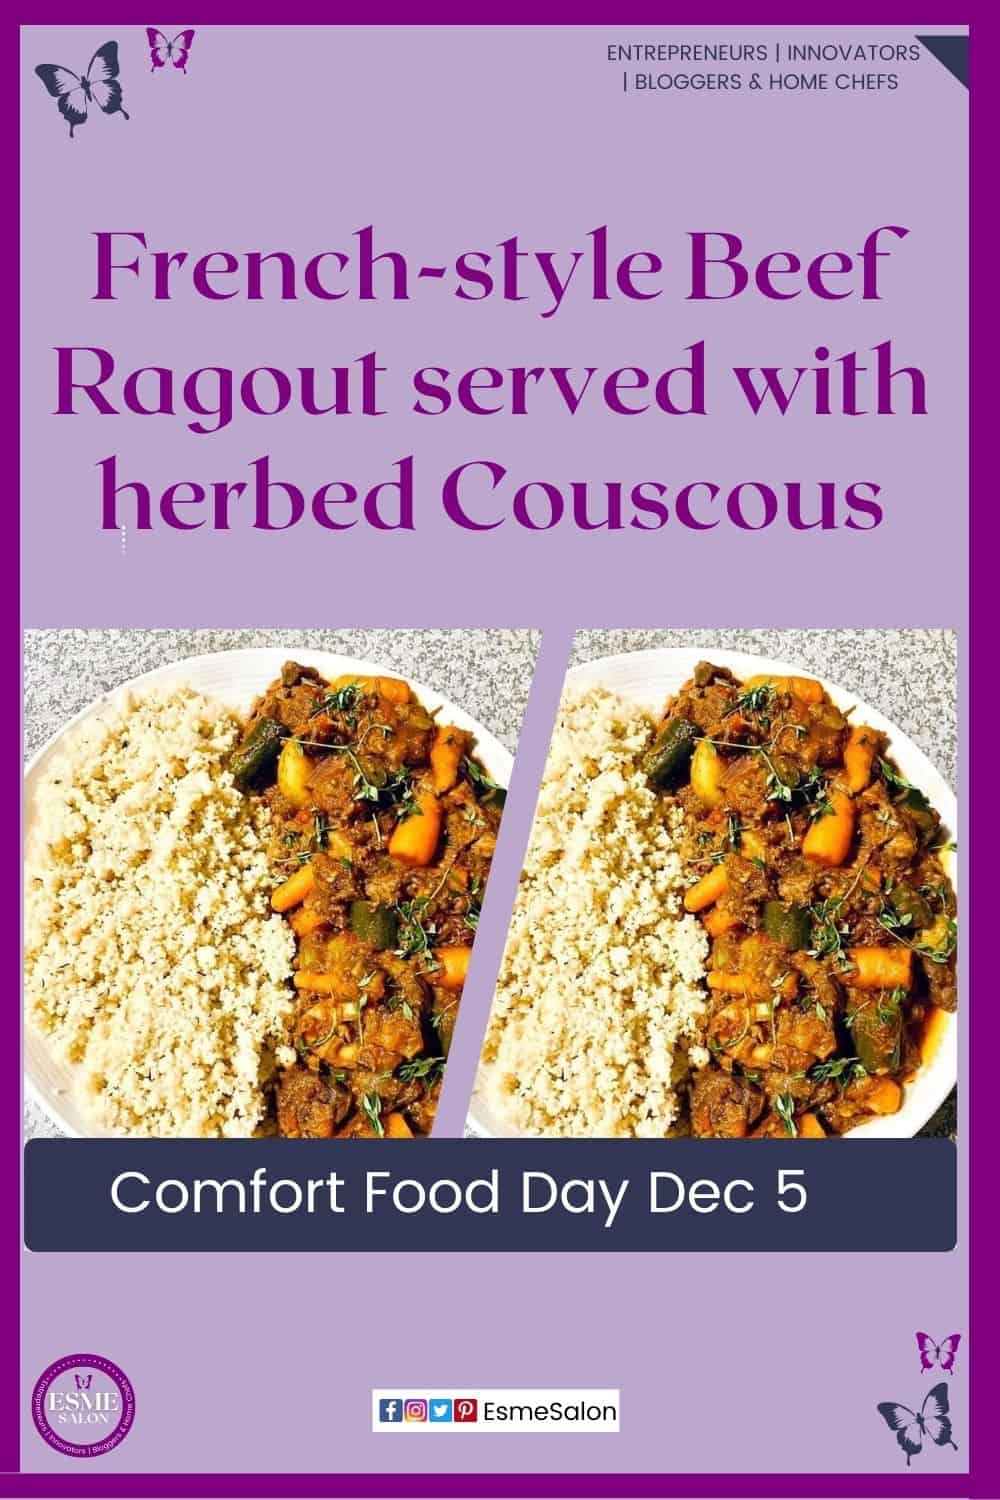 an image ofFrench-style Beef Ragout served with herbed Couscous